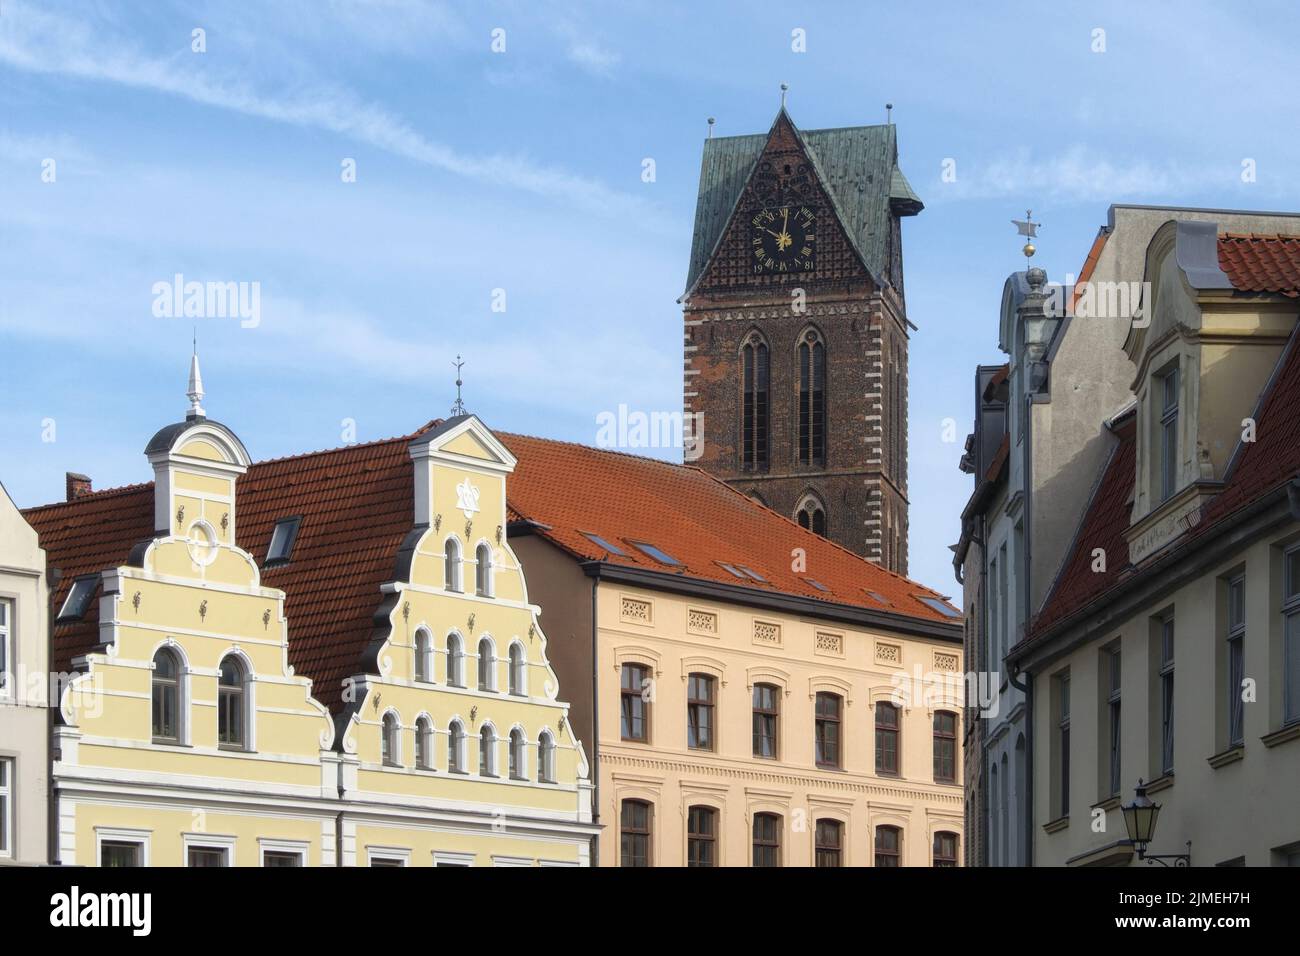 Wismar - Tower of St. Mary's Church (Marienkirchturm) behind old town houses, Germany Stock Photo